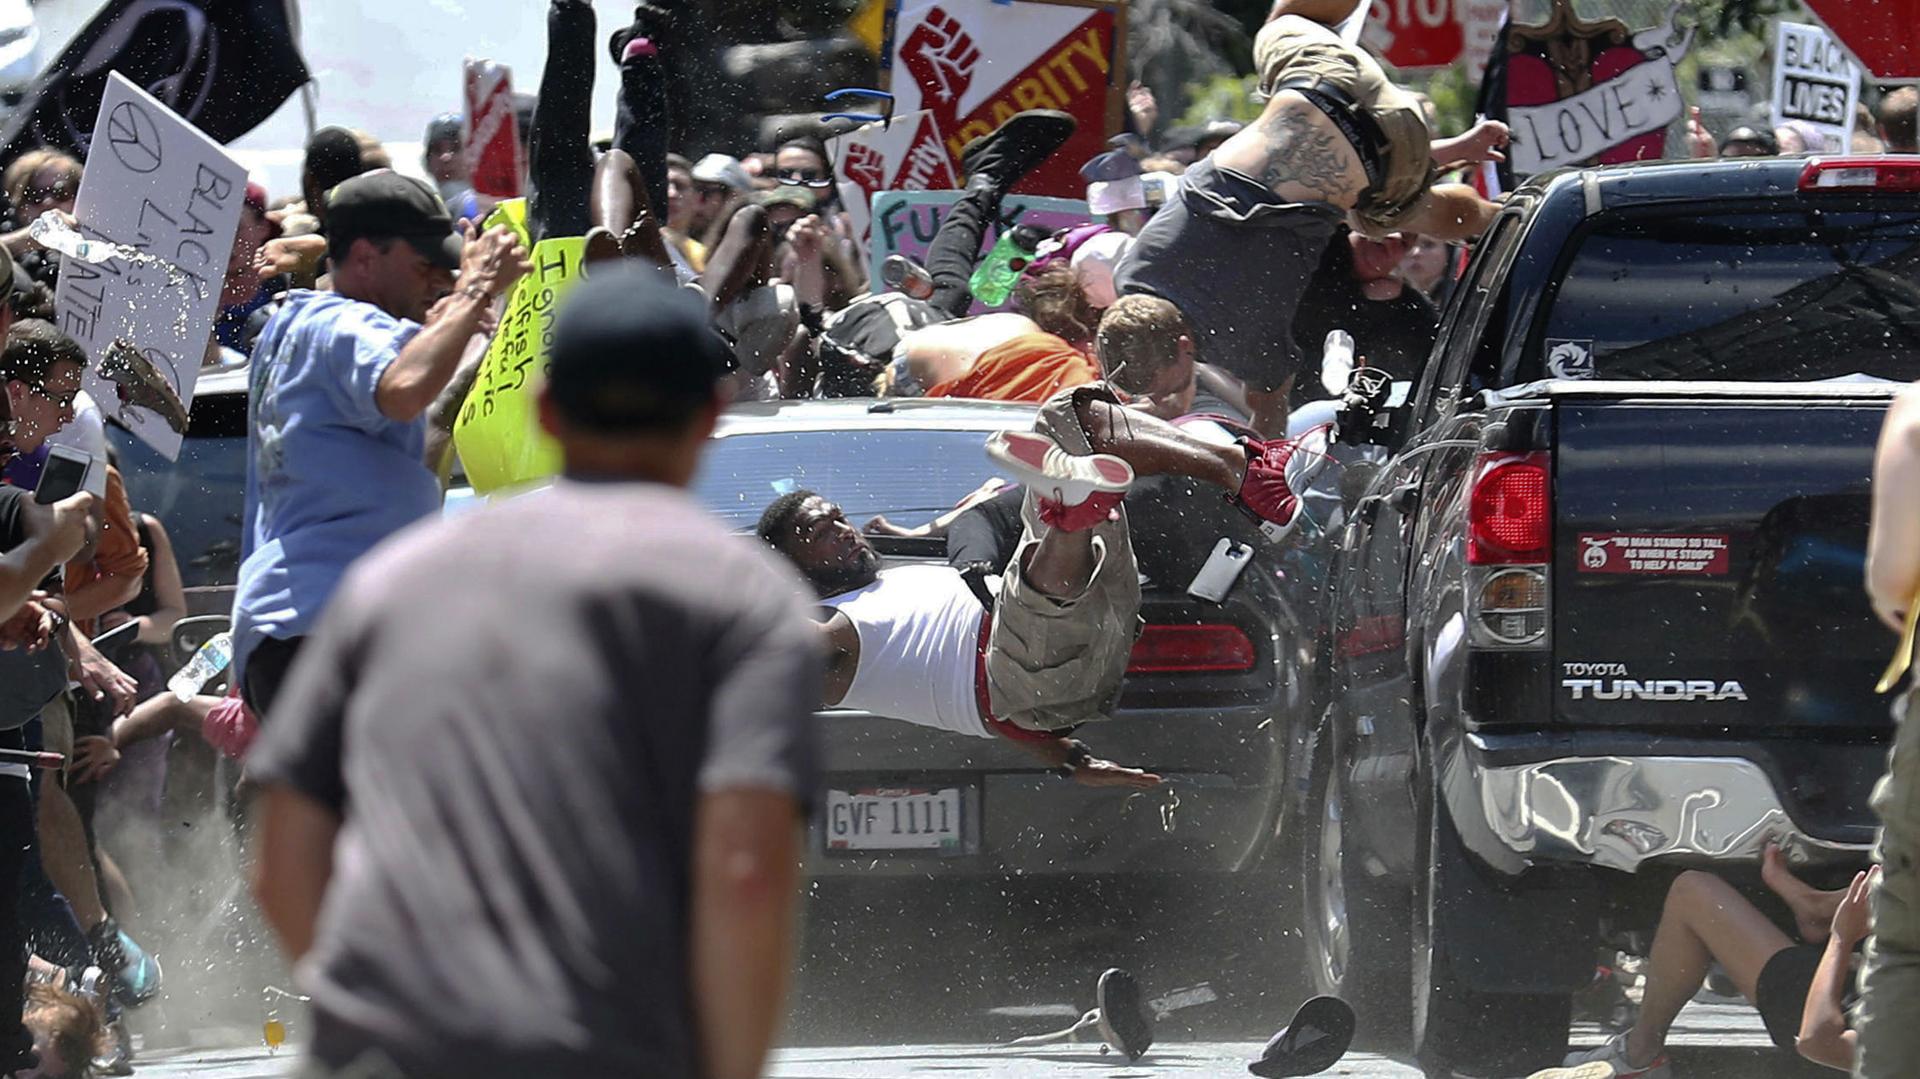 People fly into the air as a vehicle is driven into a group of protesters demonstrating against a white nationalist rally in Charlottesville, Virginia, in August 2017.